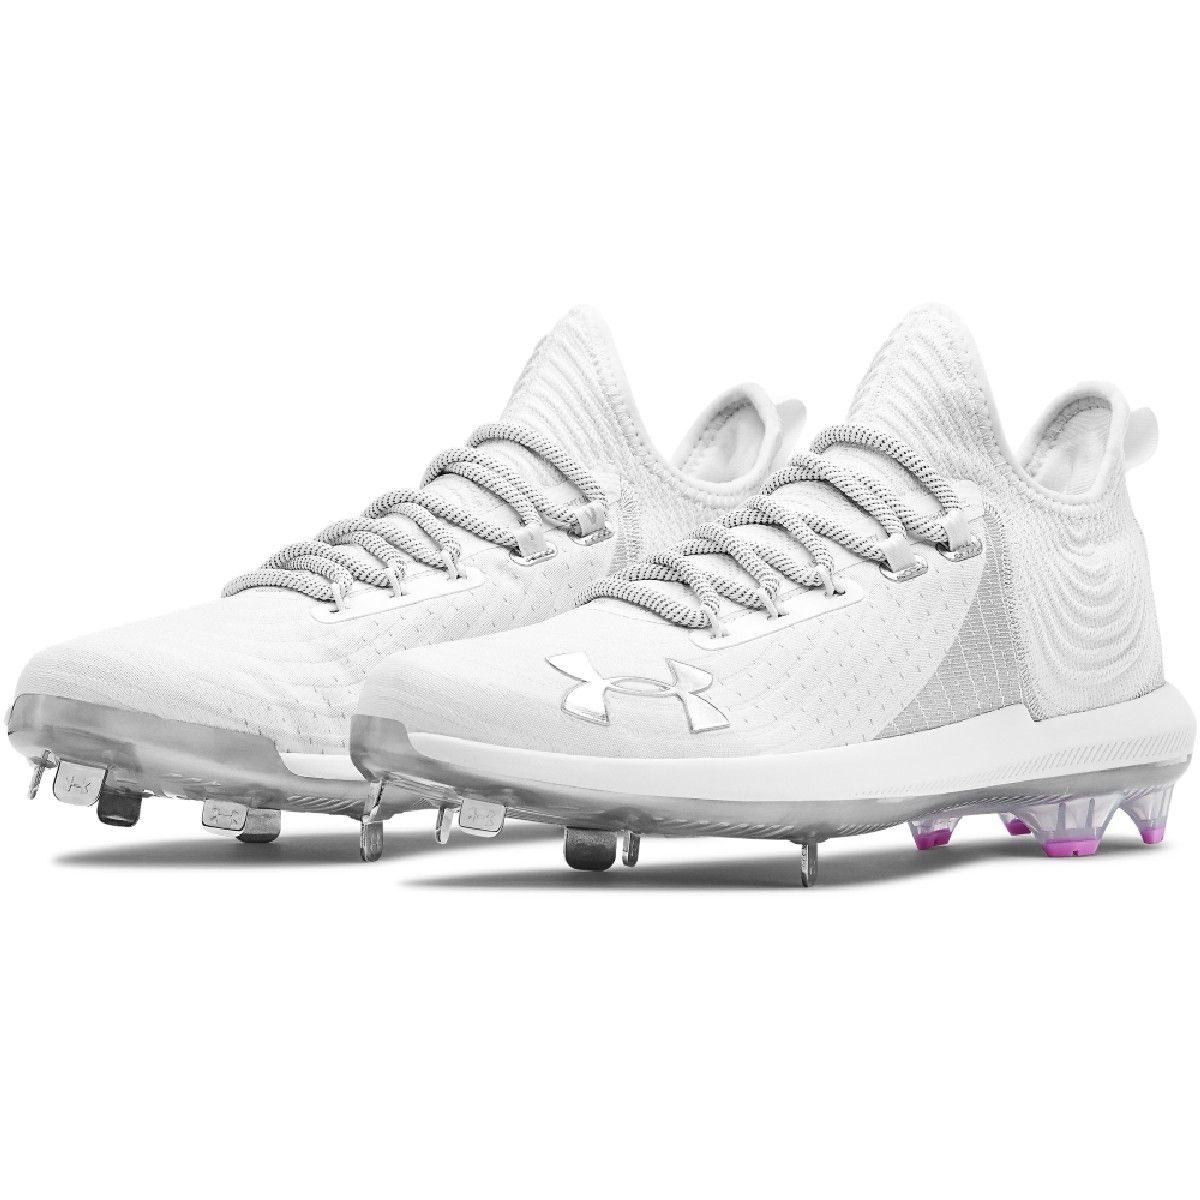 Under Armour BH Bryce Harper Baseball Cleats White Lace up w/ Strap Size 5Y